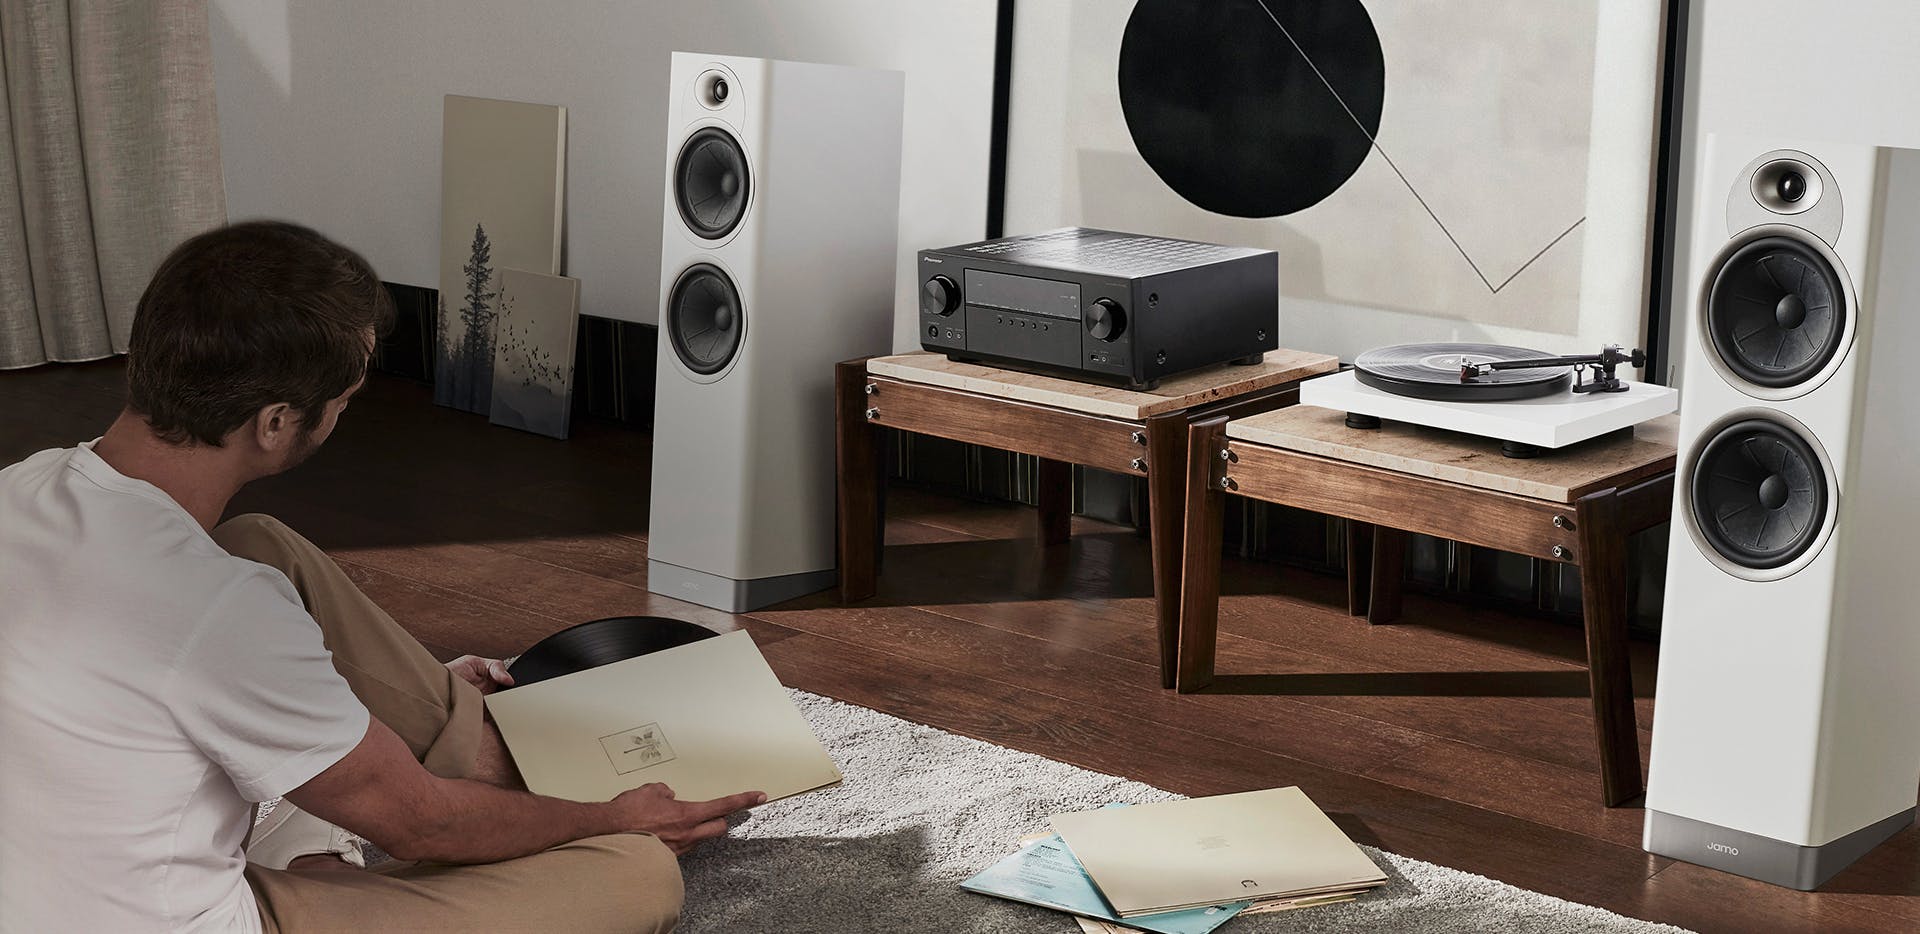 Pioneer Made for Audiophiles 1920x934